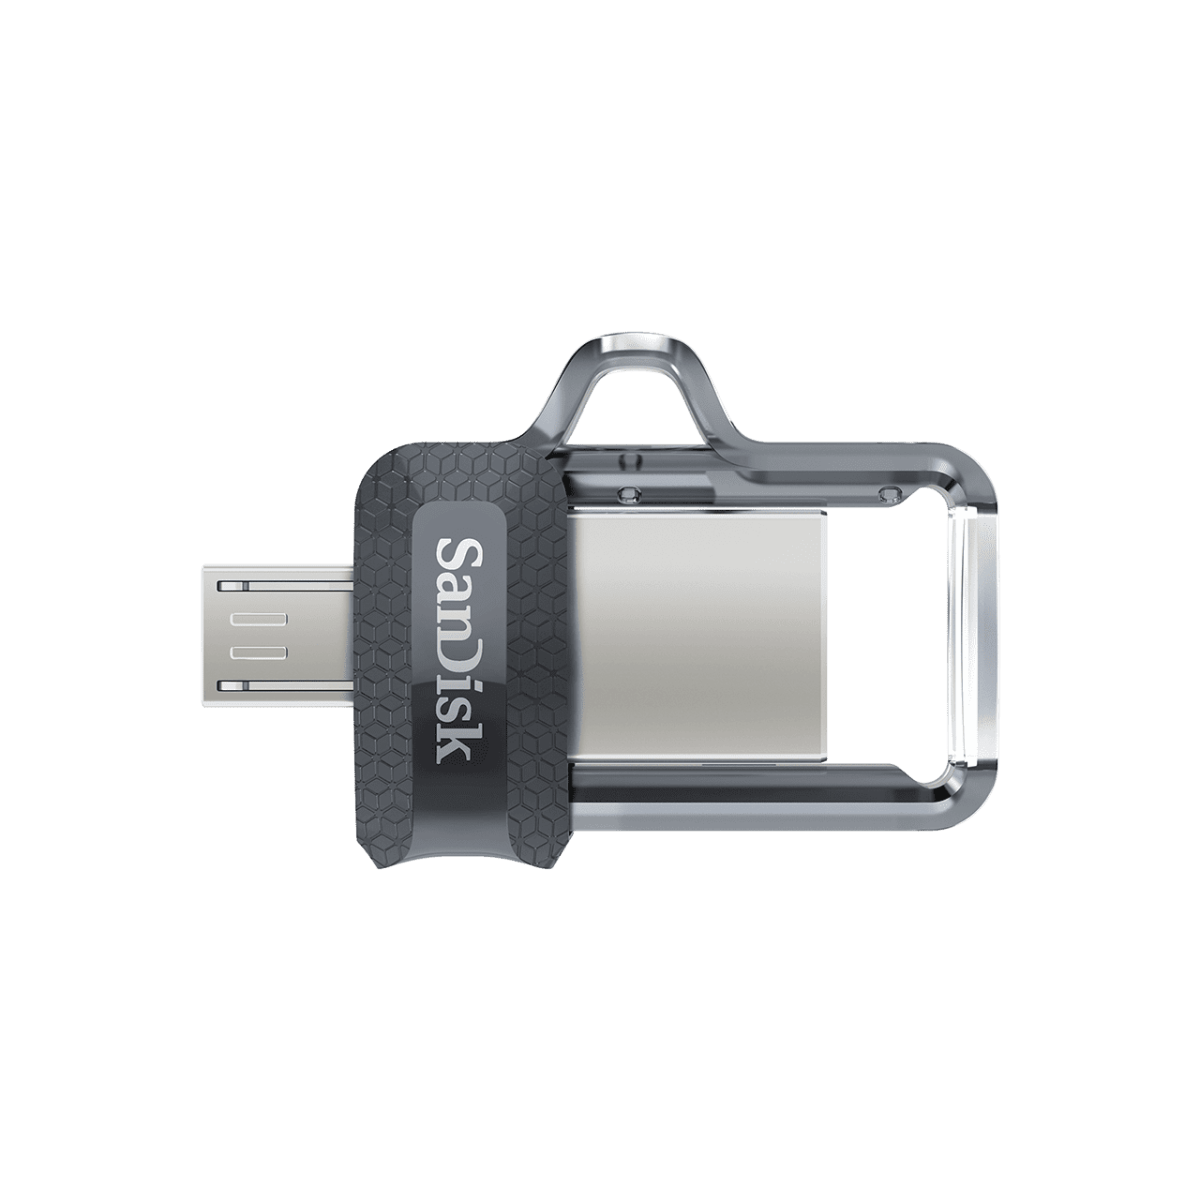 Ultra Dual Drive Usb M 3 Open Top2.Png.thumb .1280.1280 Sandisk &Lt;Div Class=&Quot;Active&Quot; Data-Sku=&Quot;Sddd3-016G-A46&Quot;&Gt; &Lt;H1&Gt;Instantly Free Up Space On Your Android Smartphone&Lt;/H1&Gt; &Lt;Div Class=&Quot;Inheritpara Mb-4&Quot;&Gt; The Sandisk Ultra® Dual Drive M3.0 Makes It Easy To Transfer Content From Your Phone To Your Computer. With A Micro-Usb Connector On One End And A Usb 3.0 Connector On The Other, The Drive Lets You Move Content Easily Between Your Devices—From Your Android™ Smartphone Or Tablet To Your Laptop, Pc Or Mac Computer&Lt;A Class=&Quot;Disclosure&Quot; Tabindex=&Quot;0&Quot; Href=&Quot;Https://Shop.westerndigital.com/Products/Usb-Flash-Drives/Sandisk-Ultra-Dual-Drive-M30-Usb-3-0-Micro-Usb#Disclosures&Quot; Target=&Quot;_Self&Quot; Rel=&Quot;Noopener Noreferrer&Quot; Aria-Labelledby=&Quot;Disclosures&Quot;&Gt;&Lt;Sup&Gt;1&Lt;/Sup&Gt;&Lt;/A&Gt;. The Usb 3.0 Connector Is High-Performance And Backward-Compatible With Usb 2.0 Ports. The Sandisk® Memory Zone App&Lt;A Class=&Quot;Disclosure&Quot; Tabindex=&Quot;0&Quot; Href=&Quot;Https://Shop.westerndigital.com/Products/Usb-Flash-Drives/Sandisk-Ultra-Dual-Drive-M30-Usb-3-0-Micro-Usb#Disclosures&Quot; Target=&Quot;_Self&Quot; Rel=&Quot;Noopener Noreferrer&Quot; Aria-Labelledby=&Quot;Disclosures&Quot;&Gt;&Lt;Sup&Gt;2&Lt;/Sup&Gt;&Lt;/A&Gt; For Android (Available On Google Play) Helps You Manage Your Device’s Memory And Your Content. &Lt;Strong&Gt;Warranty&Lt;/Strong&Gt; The Sandisk Ultra Flair Usb 3.0 Flash Drive Is Backed By A Five-Year Manufacturer Warranty&Lt;A Class=&Quot;Disclosure&Quot; Tabindex=&Quot;0&Quot; Href=&Quot;Https://Shop.westerndigital.com/Products/Usb-Flash-Drives/Sandisk-Ultra-Flair-Usb-3-0#Disclosures&Quot; Target=&Quot;_Self&Quot; Rel=&Quot;Noopener Noreferrer&Quot; Aria-Labelledby=&Quot;Disclosures&Quot;&Gt;&Lt;Sup&Gt;2&Lt;/Sup&Gt;&Lt;/A&Gt; &Lt;/Div&Gt; &Lt;/Div&Gt; Sandisk Ultra Dual Drive M3.0 Flash Drive For Android Smartphones (128Gb)